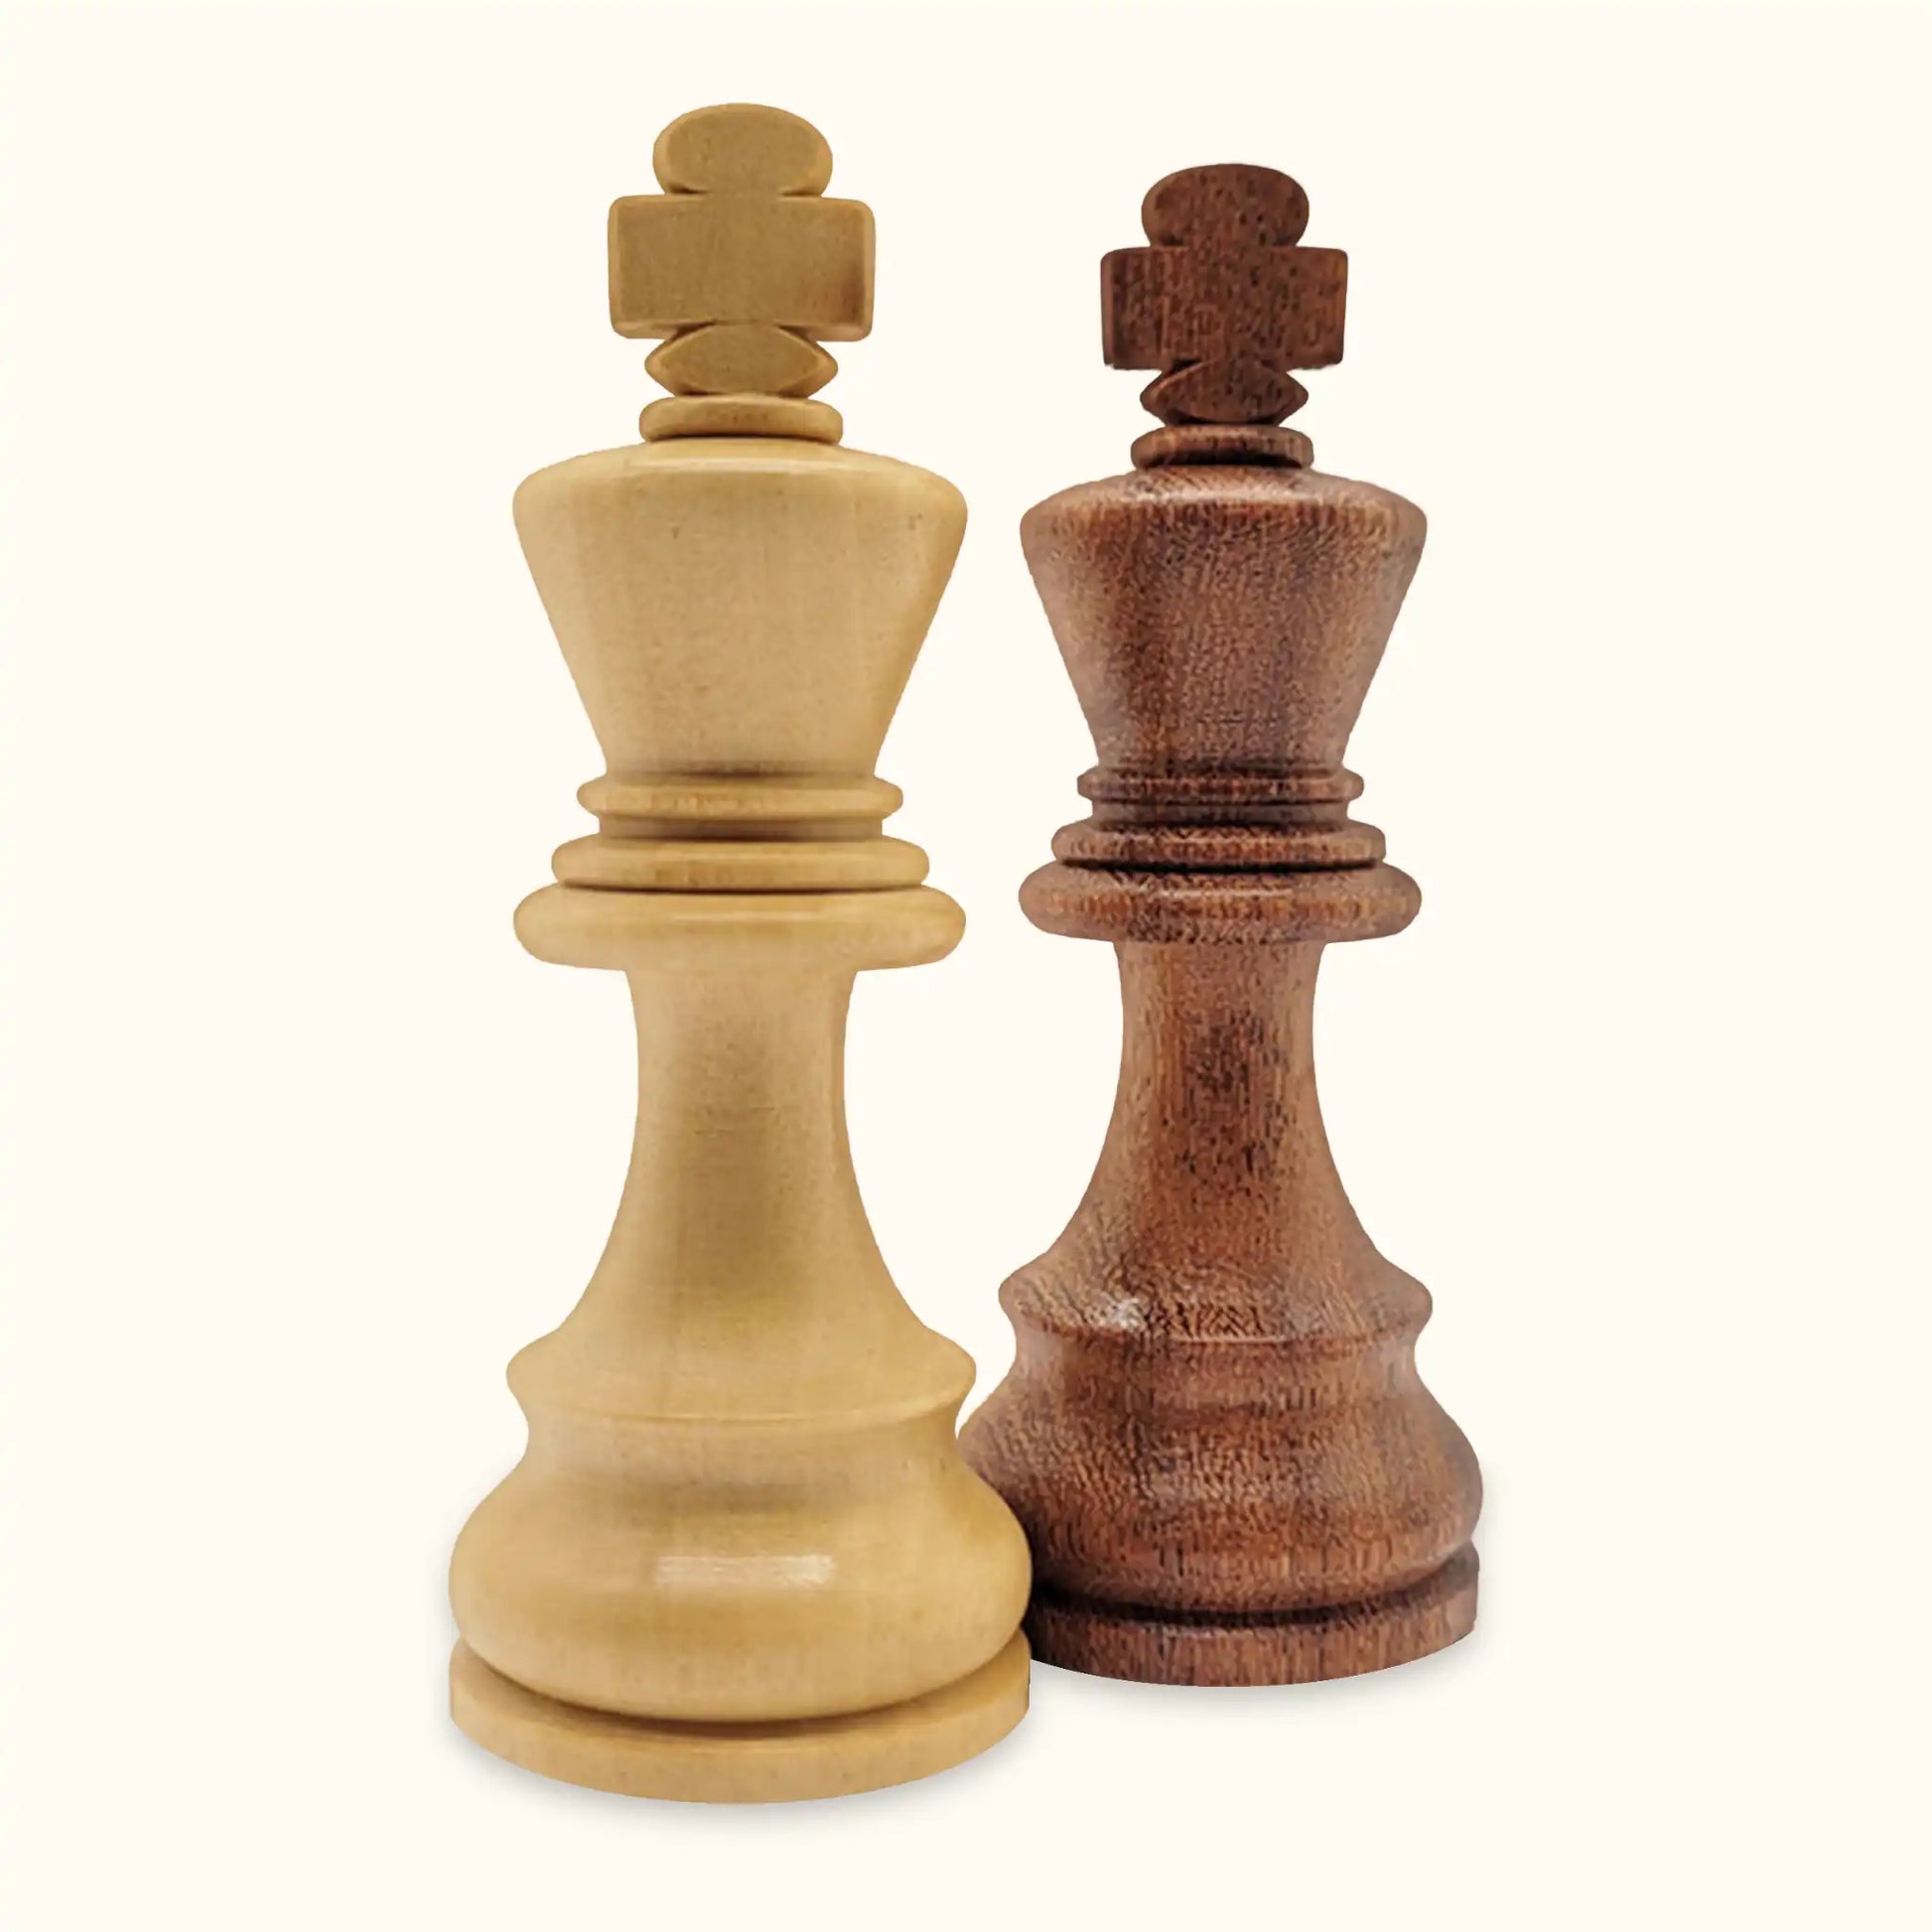 The knight of beauty - Chess.com  Chess pieces, Knight chess, Chess set